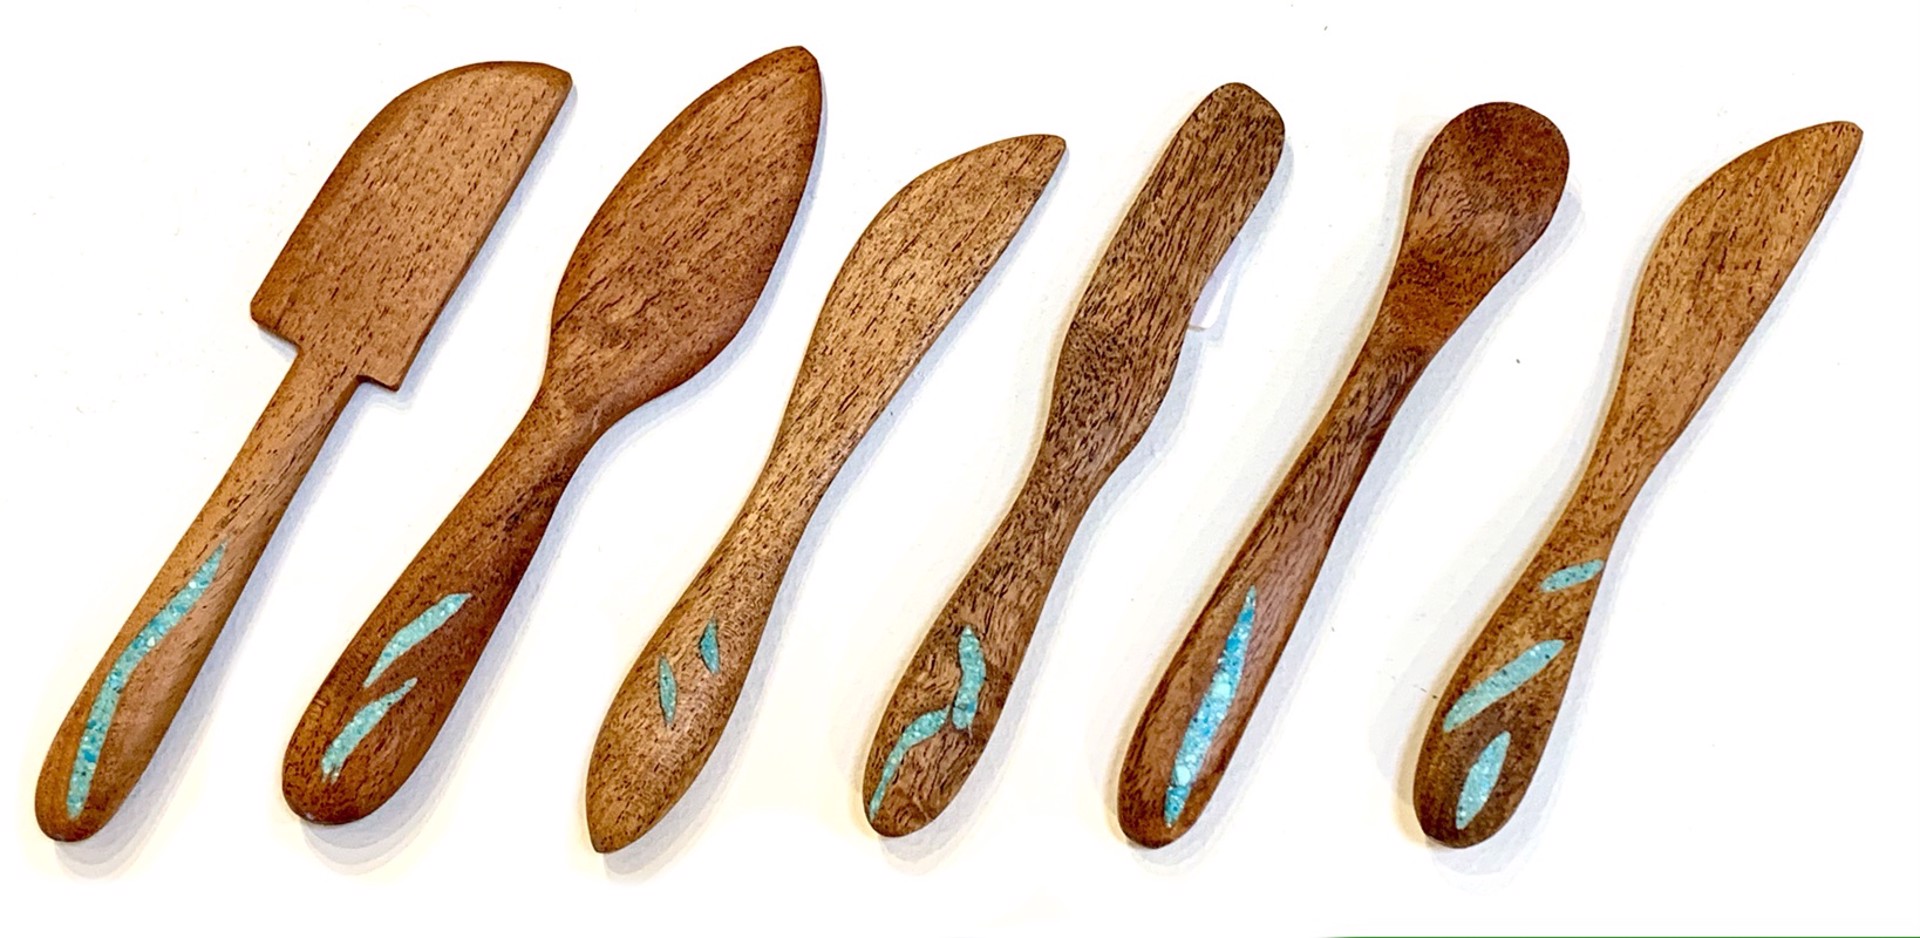 Utensil - Spreaders - Assorted Mesquite with Inlay by TreeStump Woodcraft